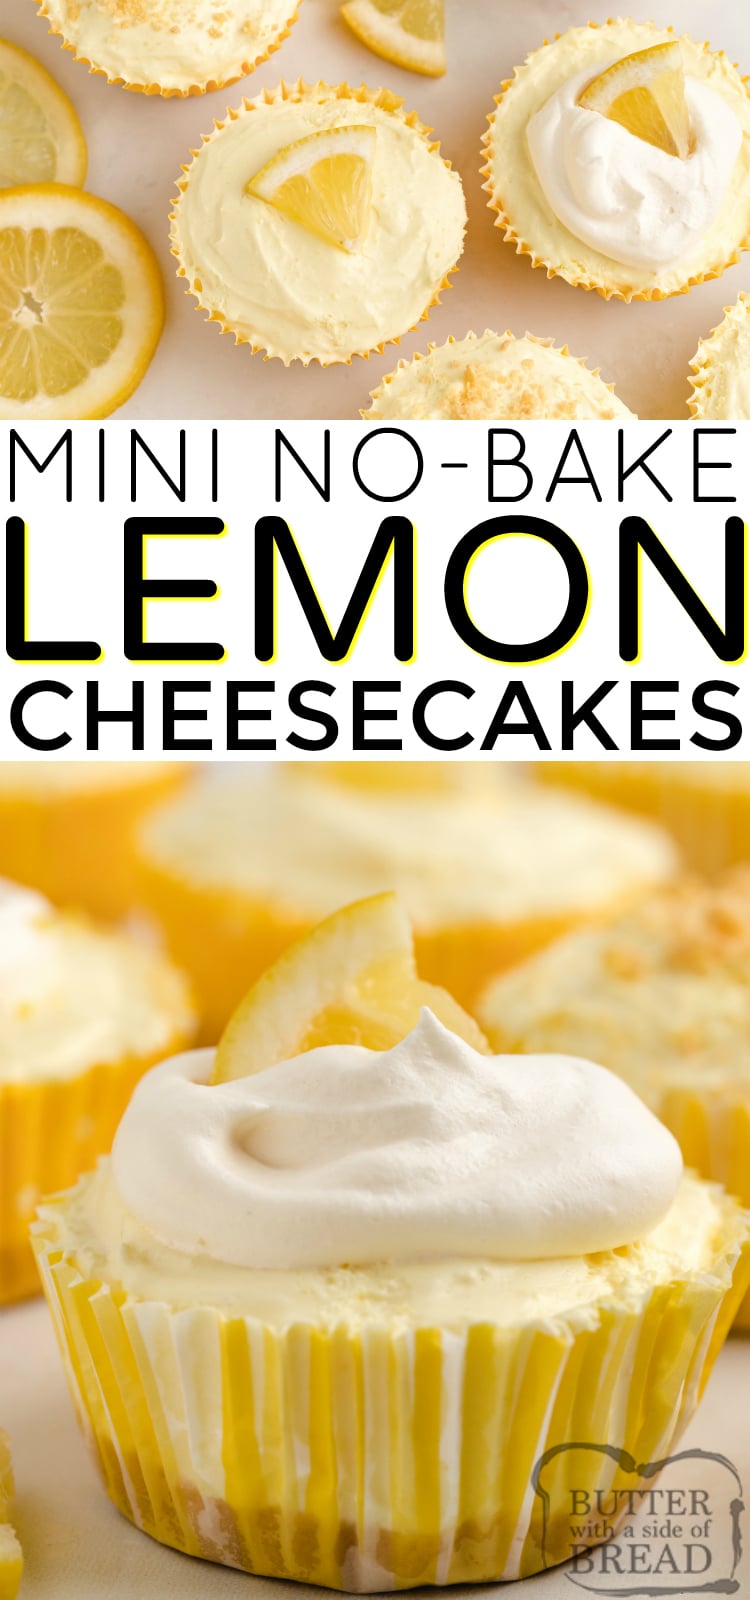 No Bake Mini Lemon Cheesecakes made with Lemon Oreos and lemon pudding are delicious! This easy no bake cheesecake recipe made with only 6 ingredients is the perfect summer dessert!